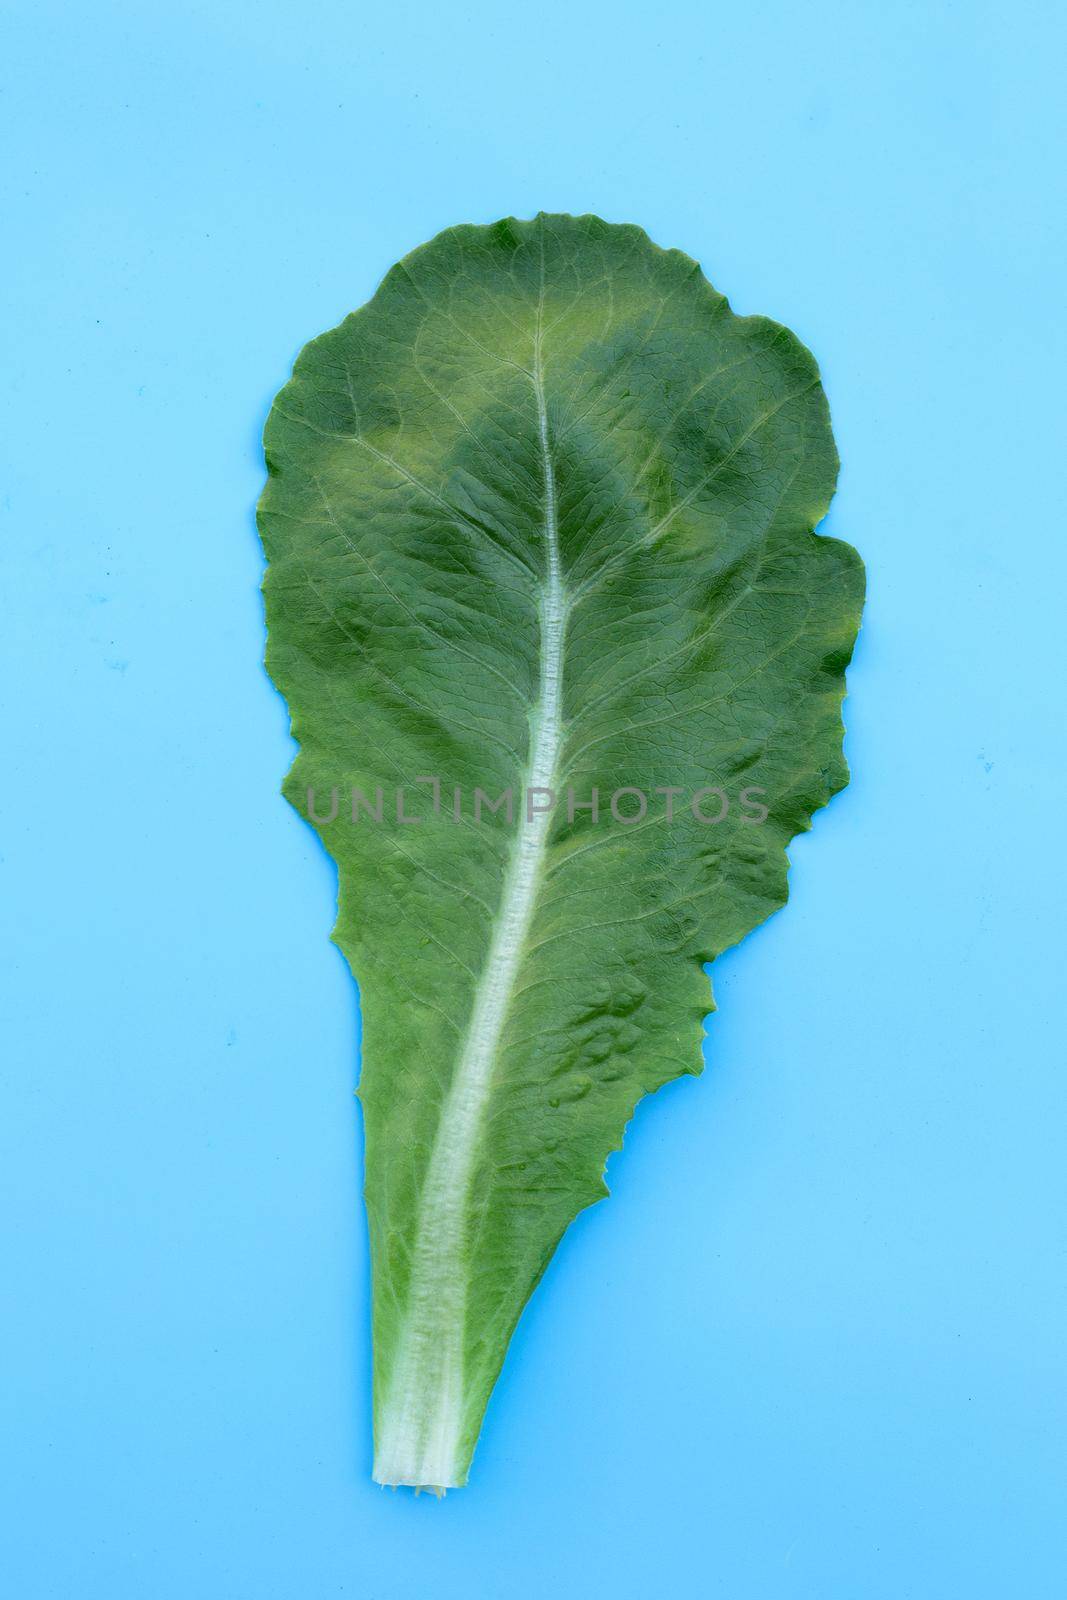 Lettuce leaf on blue background. Top view by Bowonpat